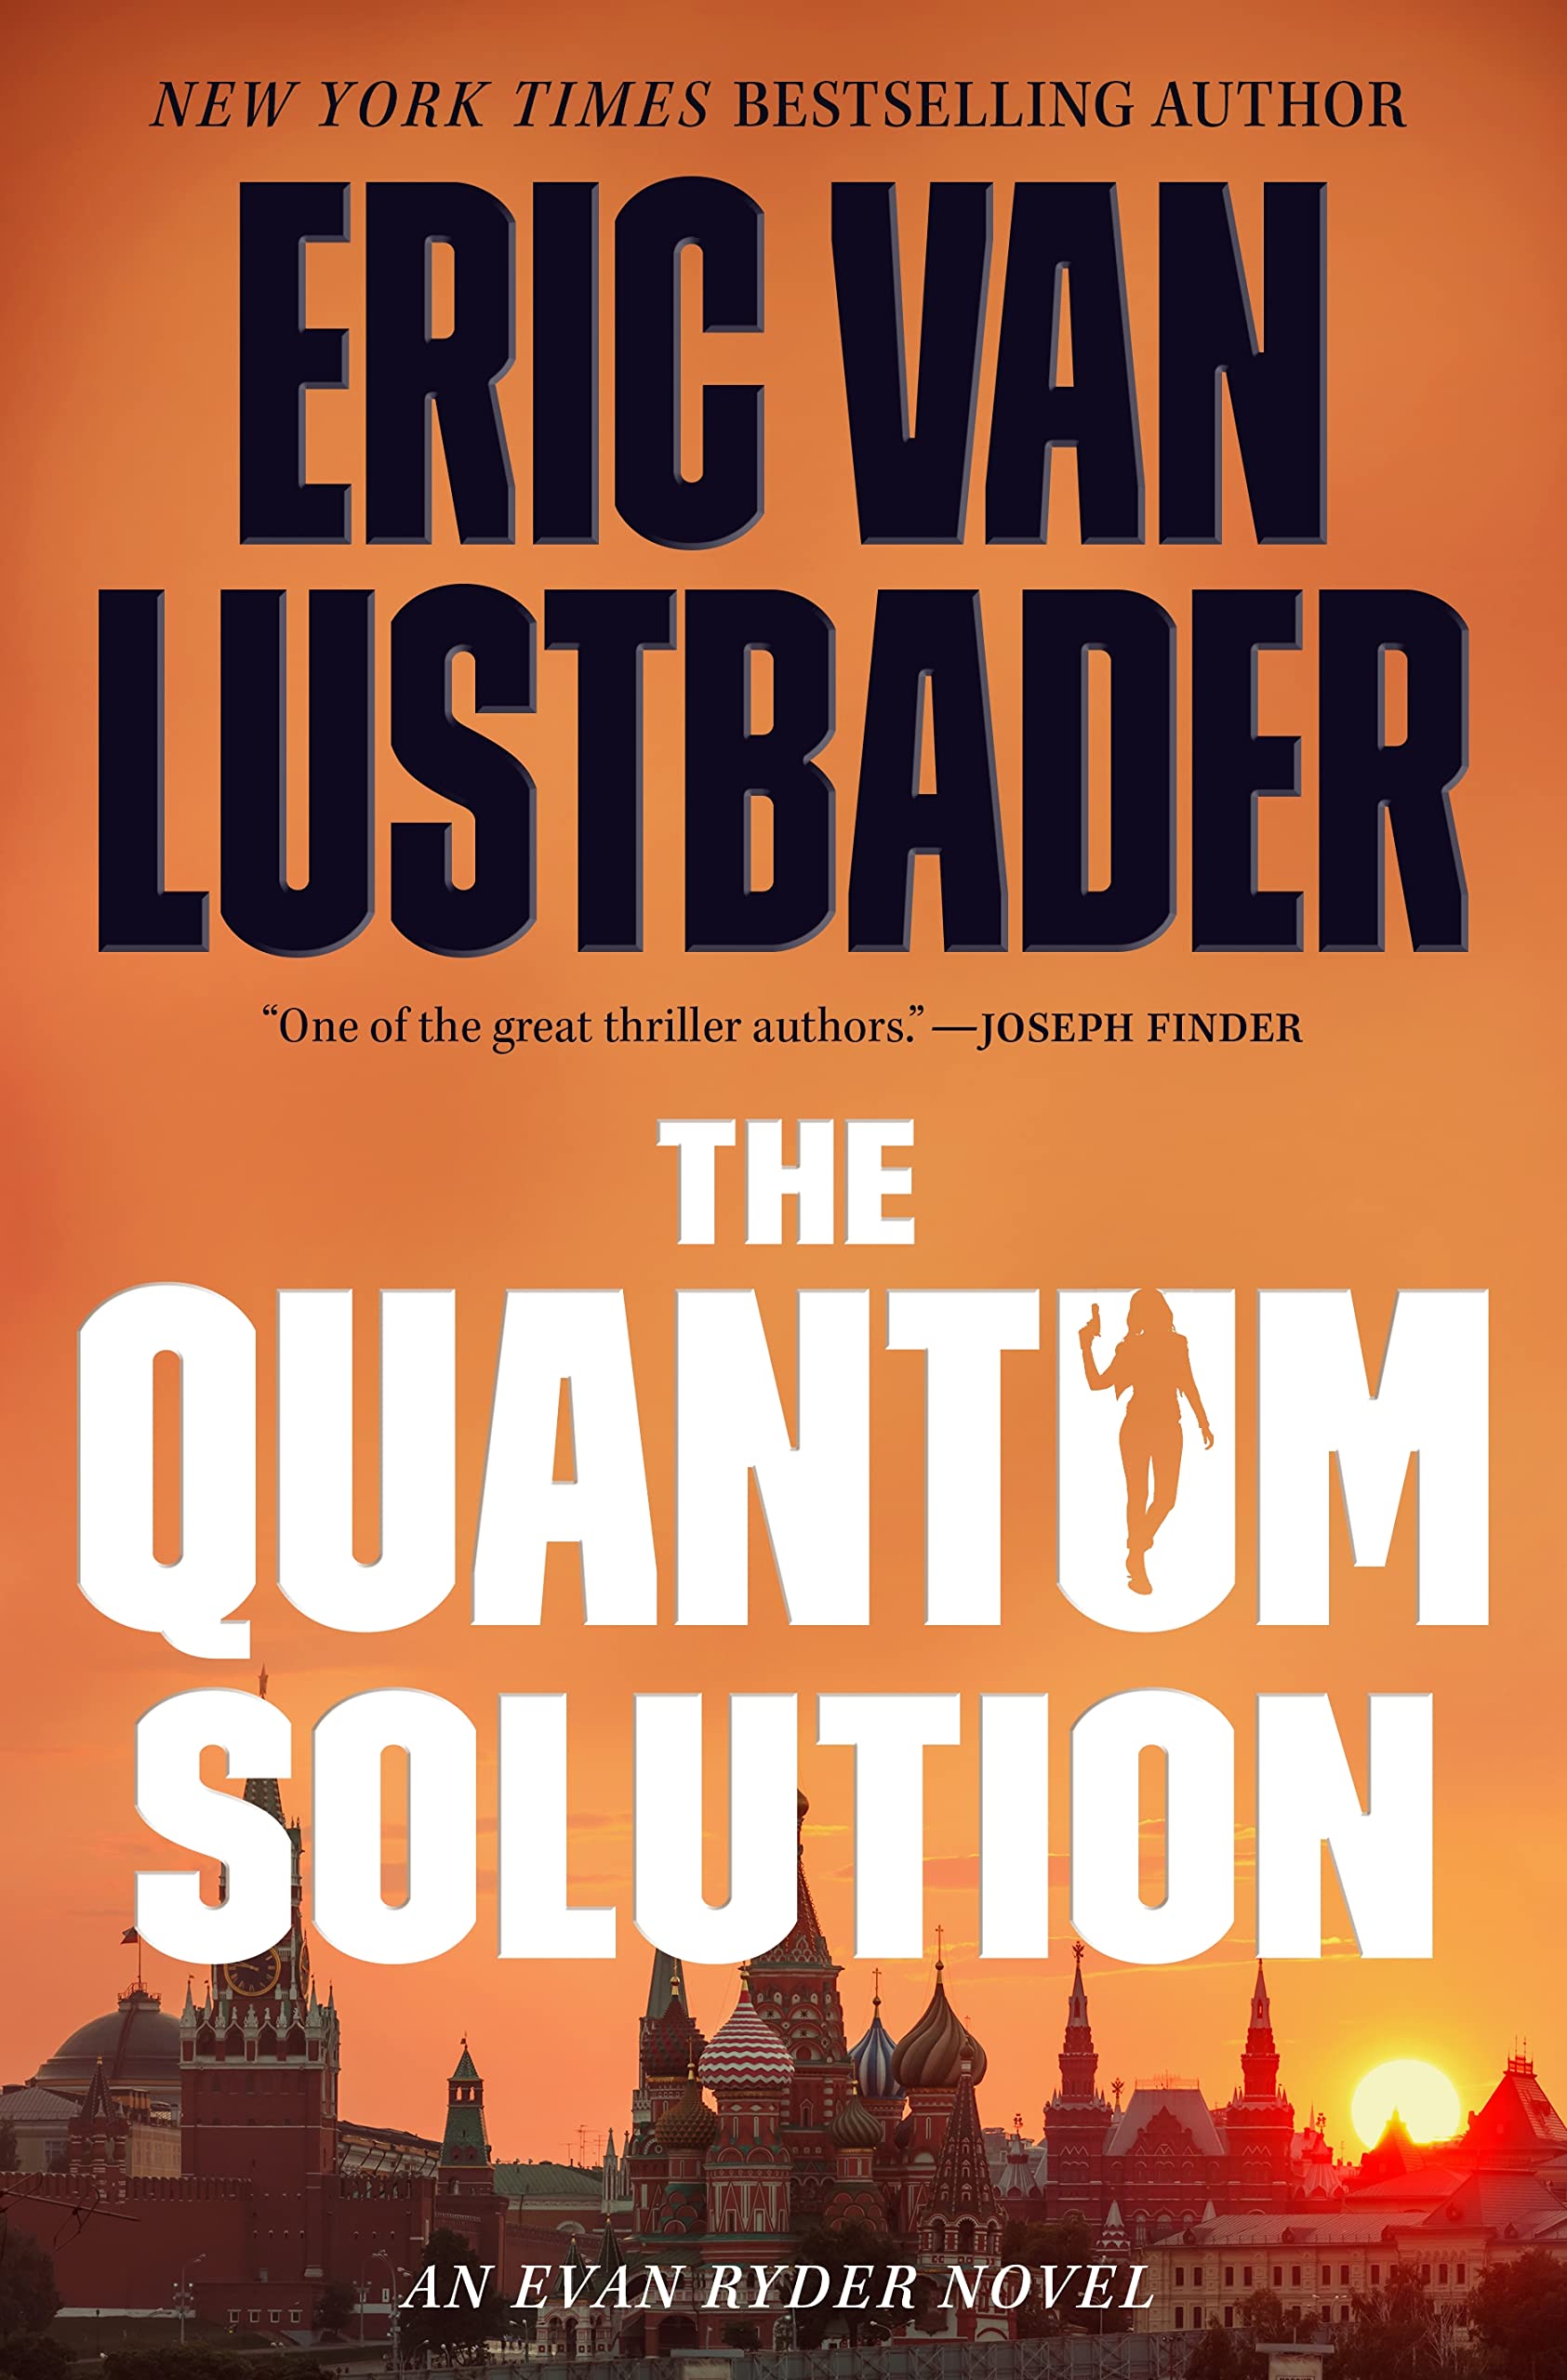 Image for "The Quantum Solution"